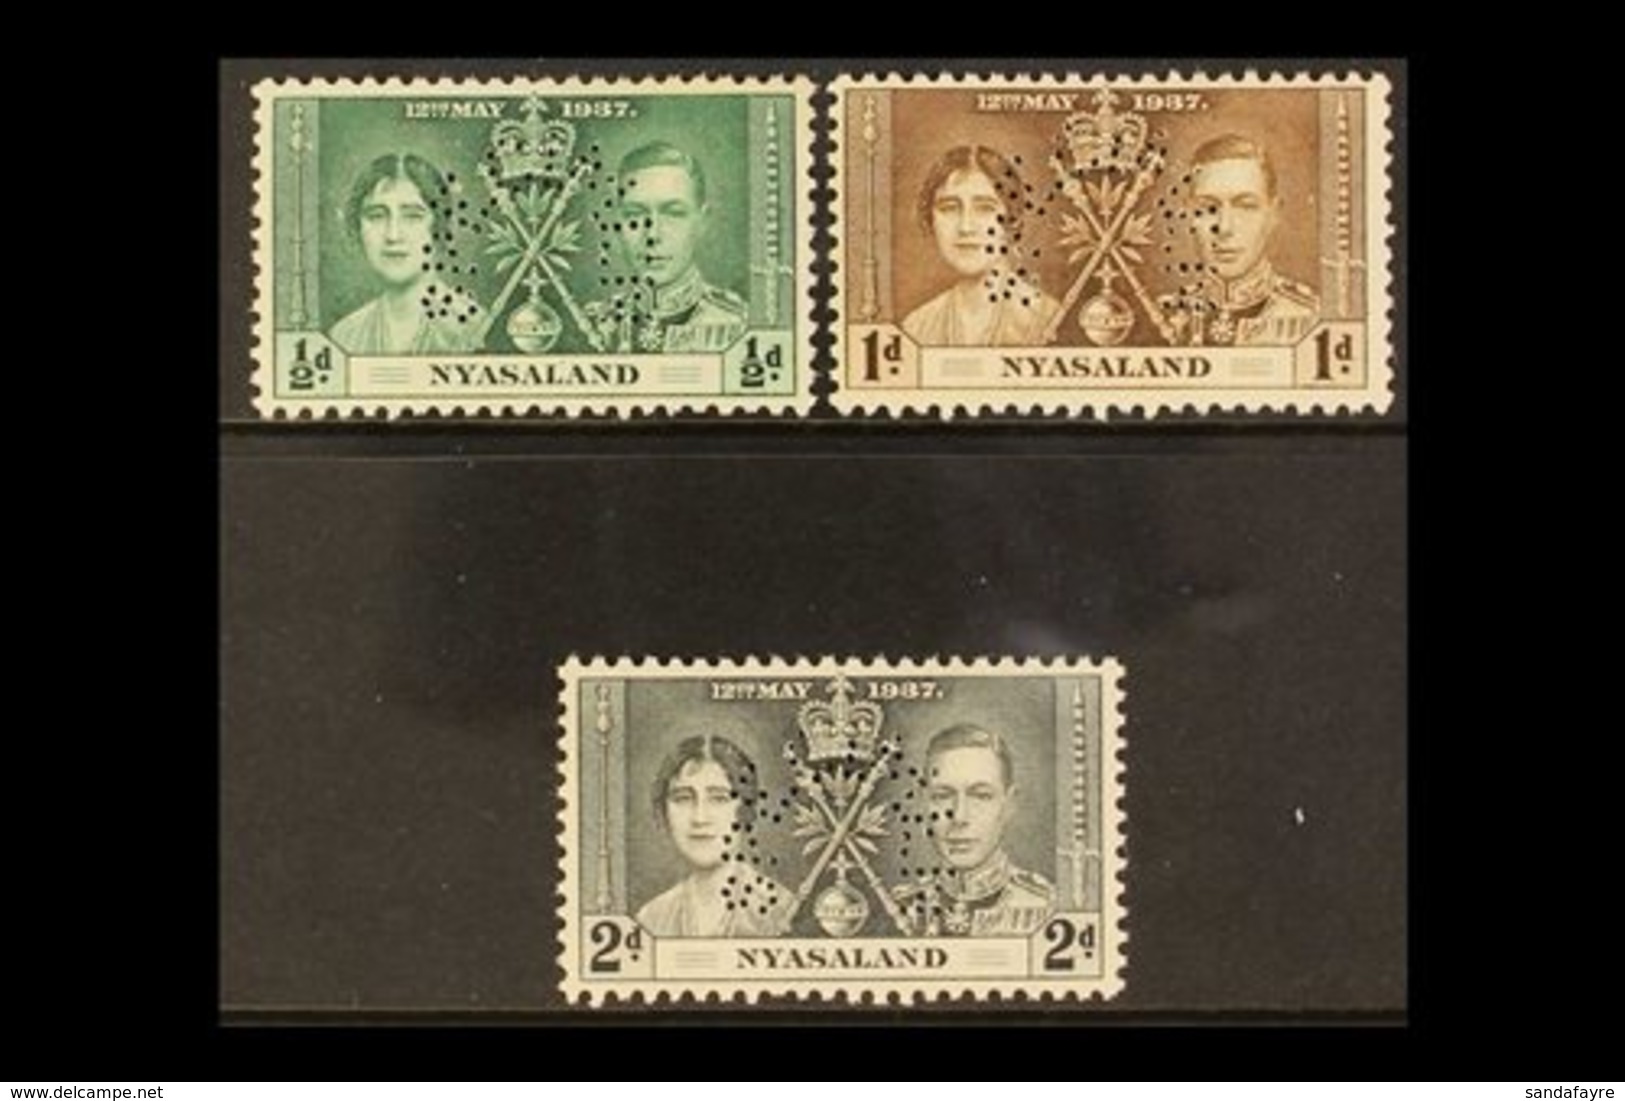 \Y 1937\Y Coronation Set Complete, Perforated "Specimen", SG 127s/129s, Very Fine Mint. (3 Stamps) For More Images, Plea - Nyassaland (1907-1953)